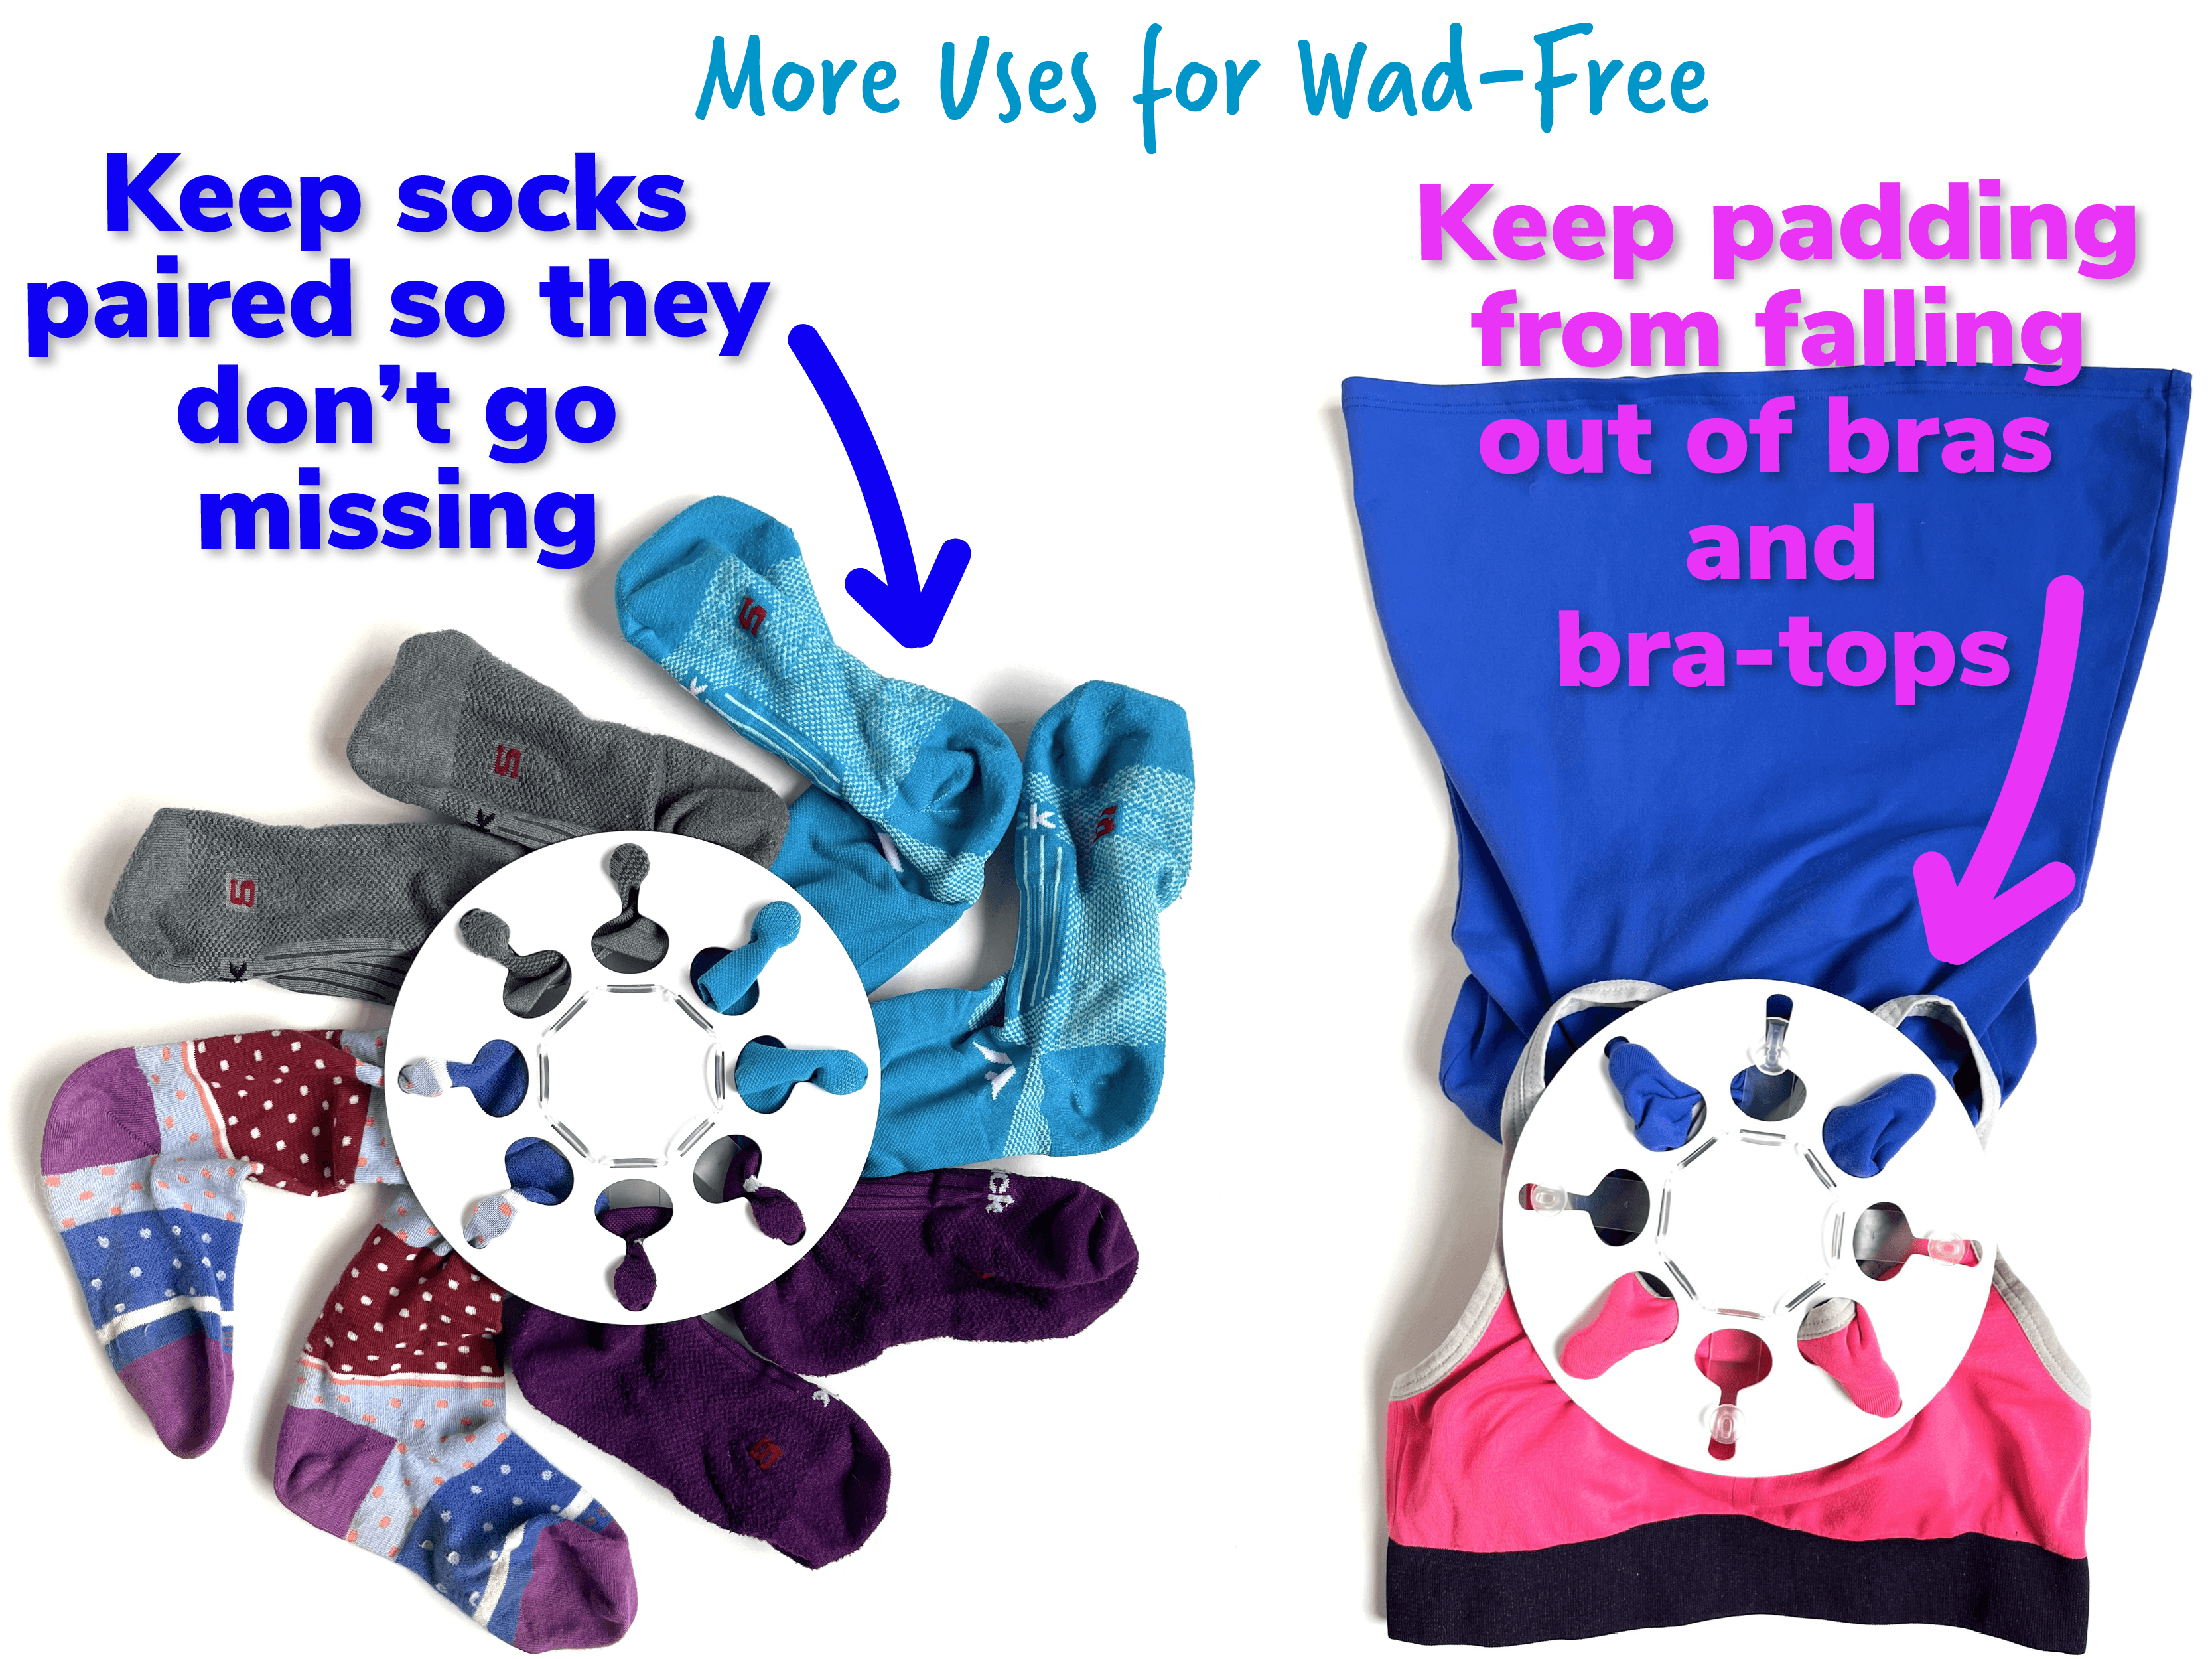 Wad-Free for Blankets and Duvet Covers Review